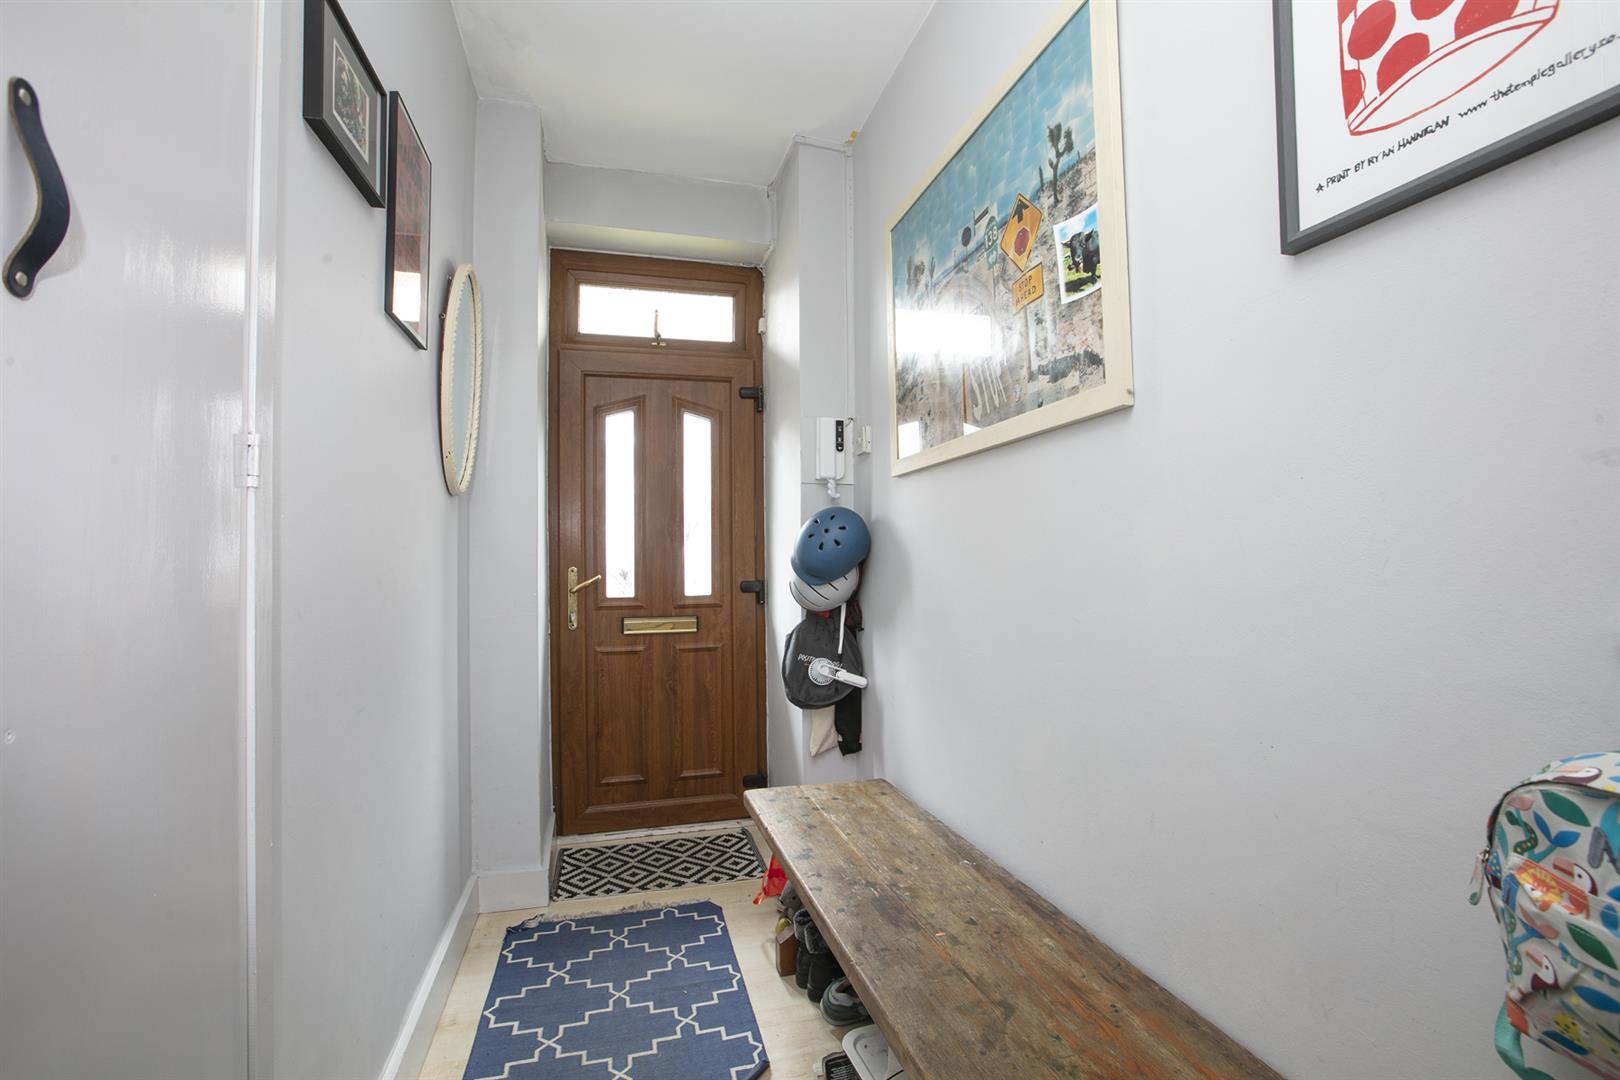 Flat - Purpose Built For Sale in Bonsor Street, Camberwell, SE5 870 view12